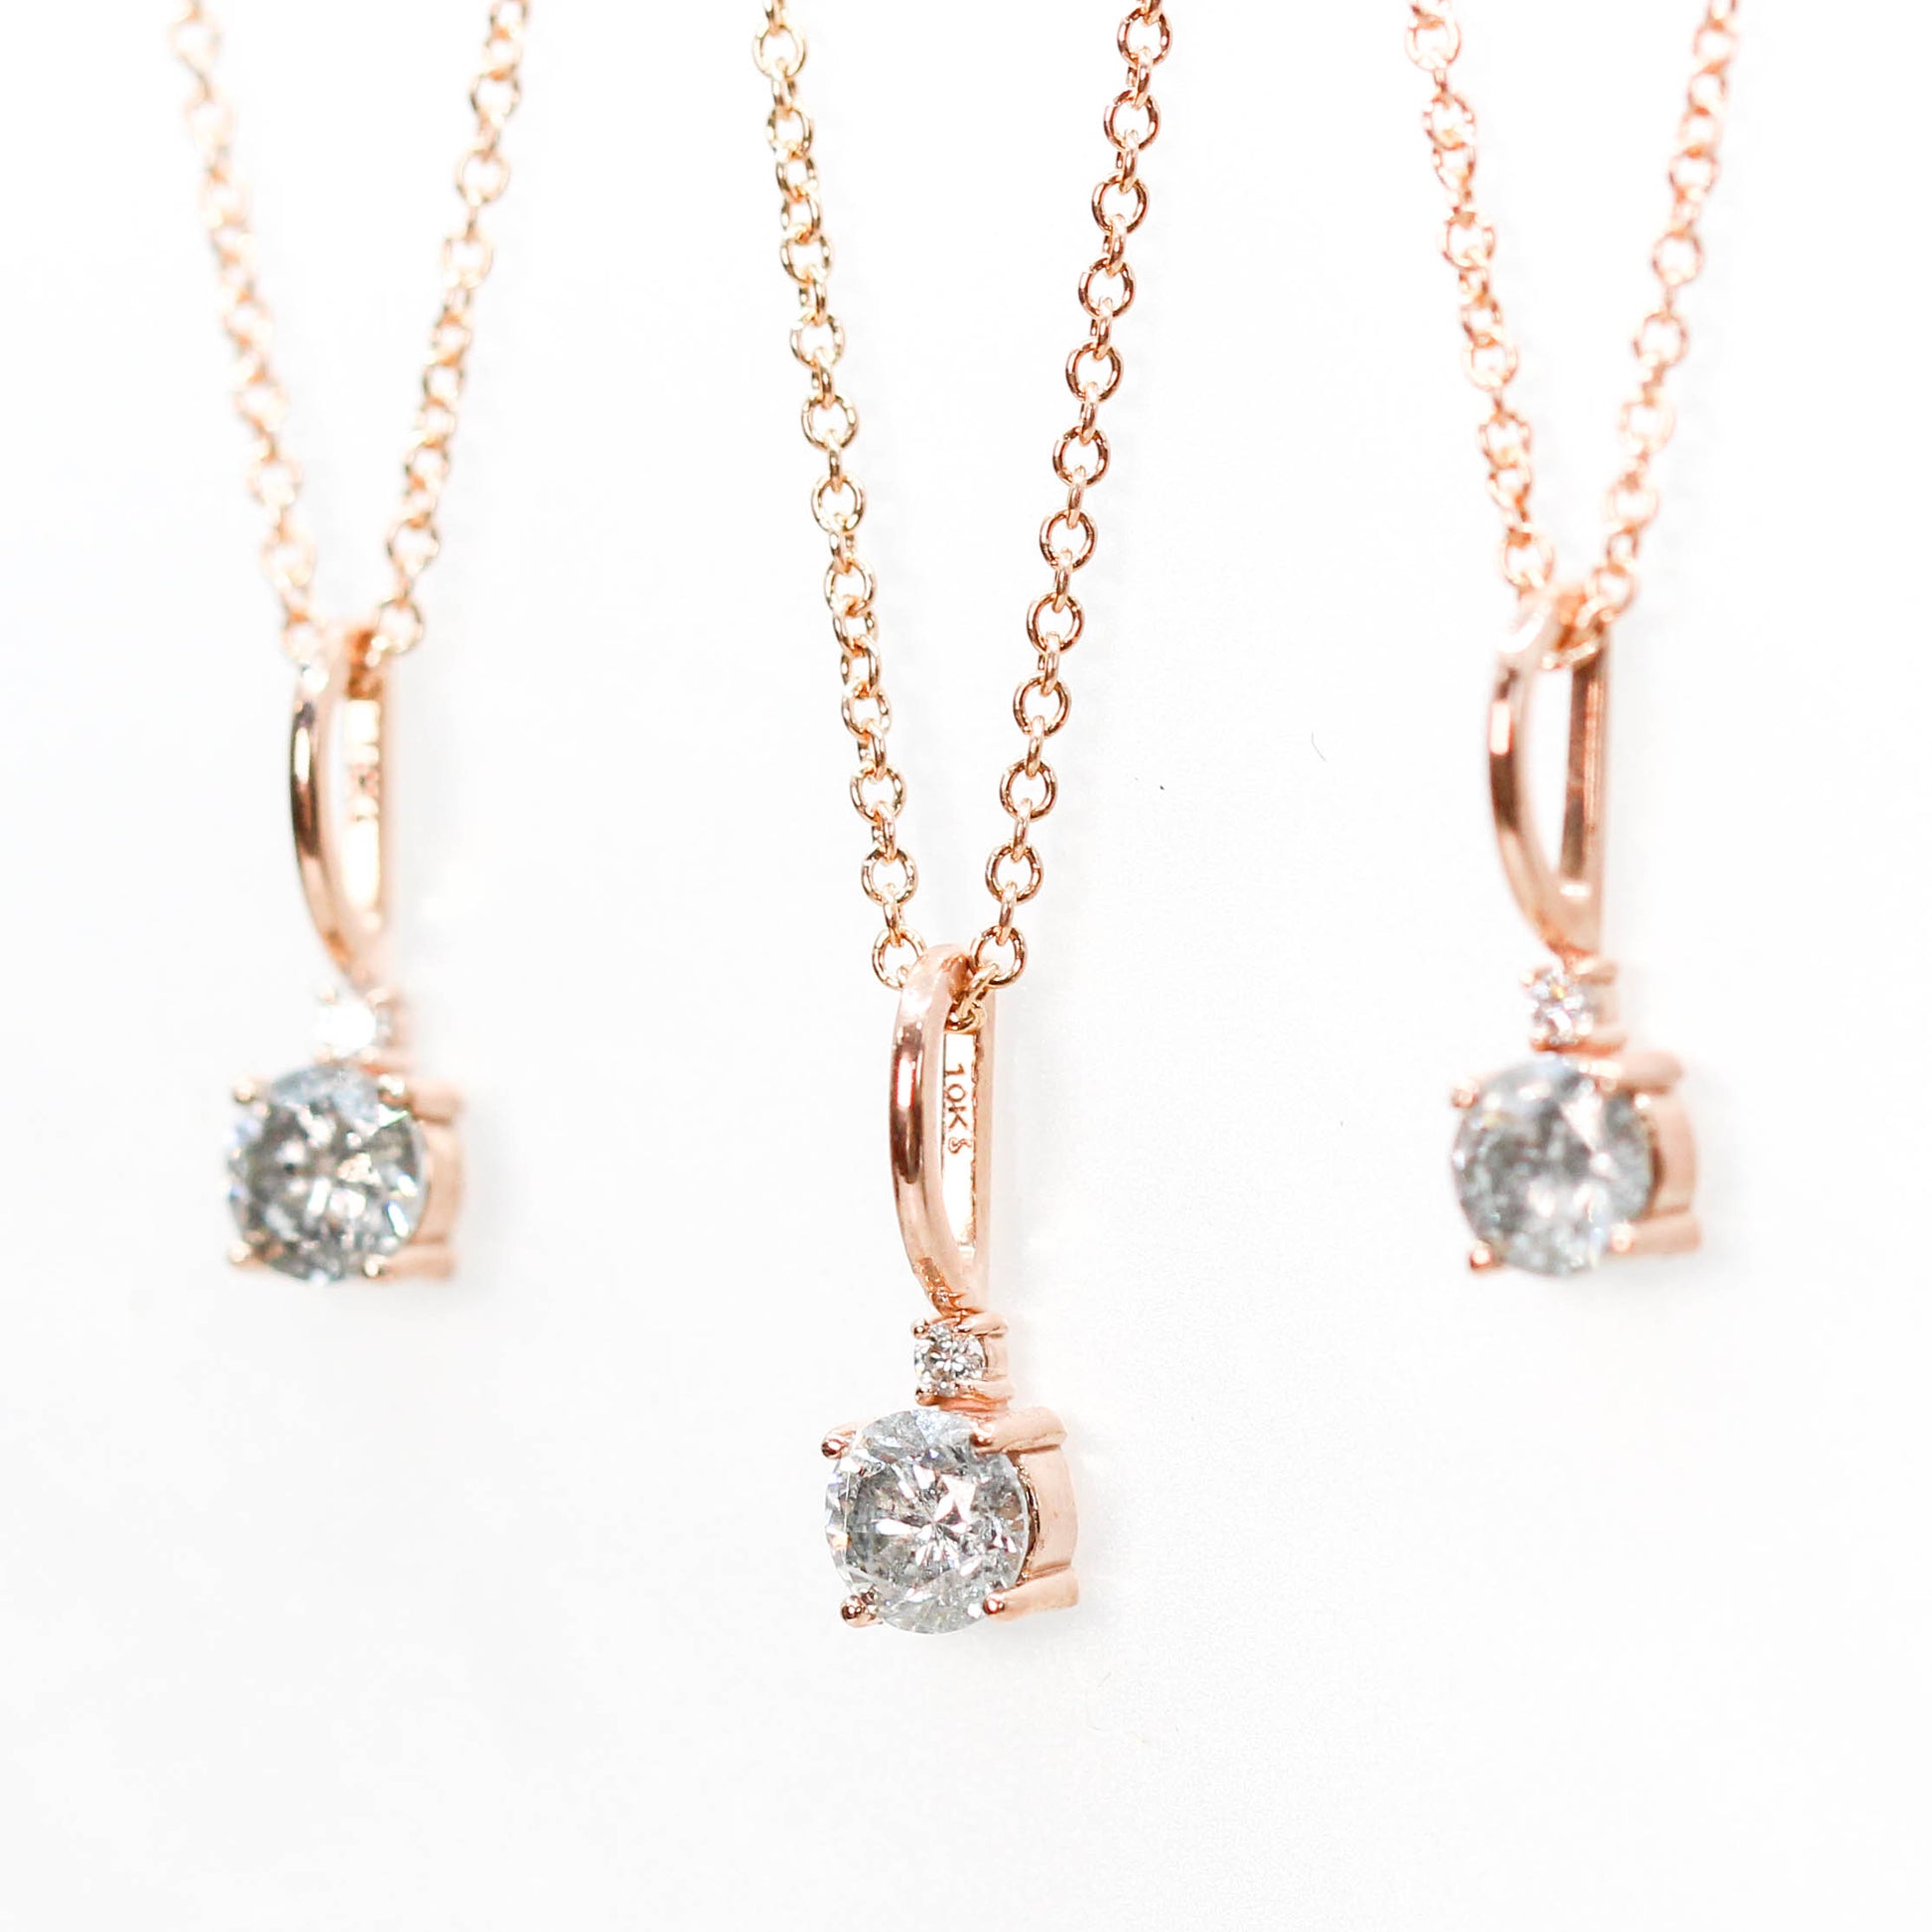 10k Rose Gold Round Celestial Diamond Pendant Necklace - Midwinter Co. Alternative Bridal Rings and Modern Fine Jewelry